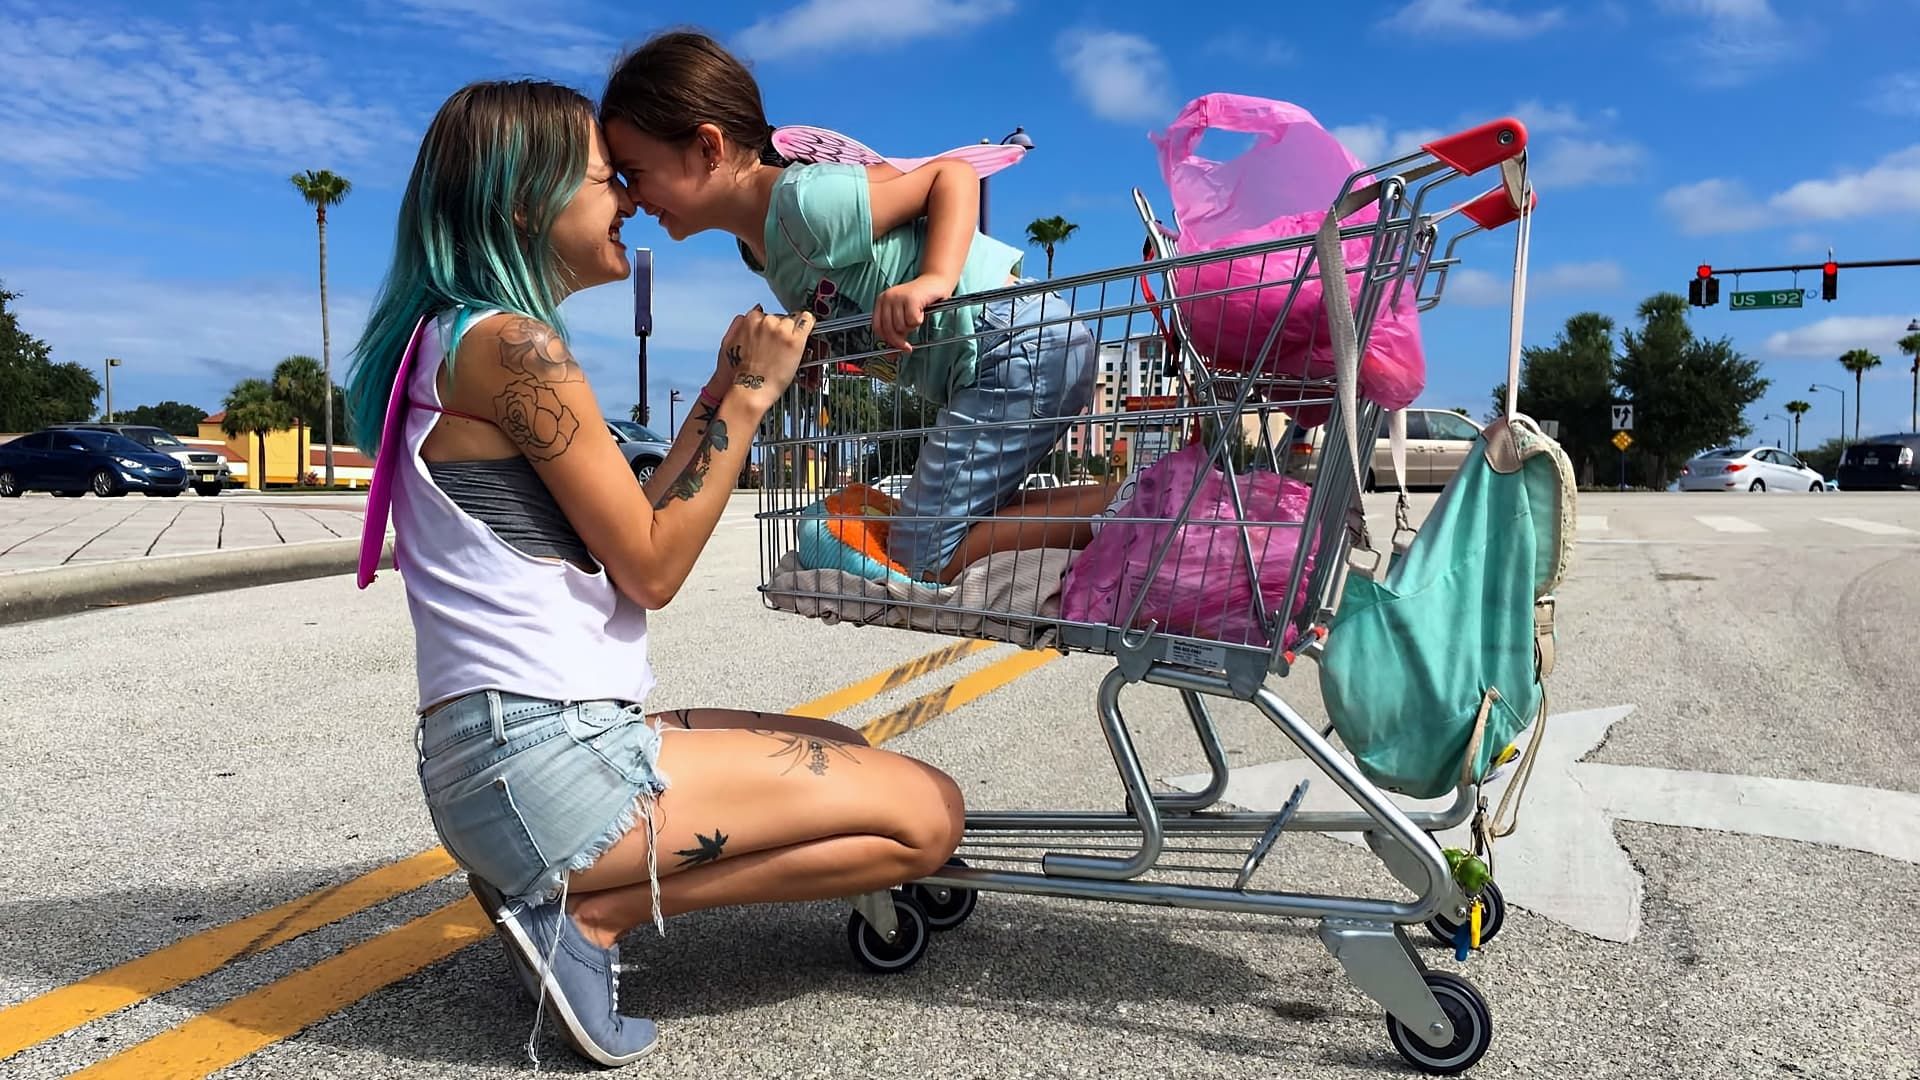 The Florida Project Backdrop